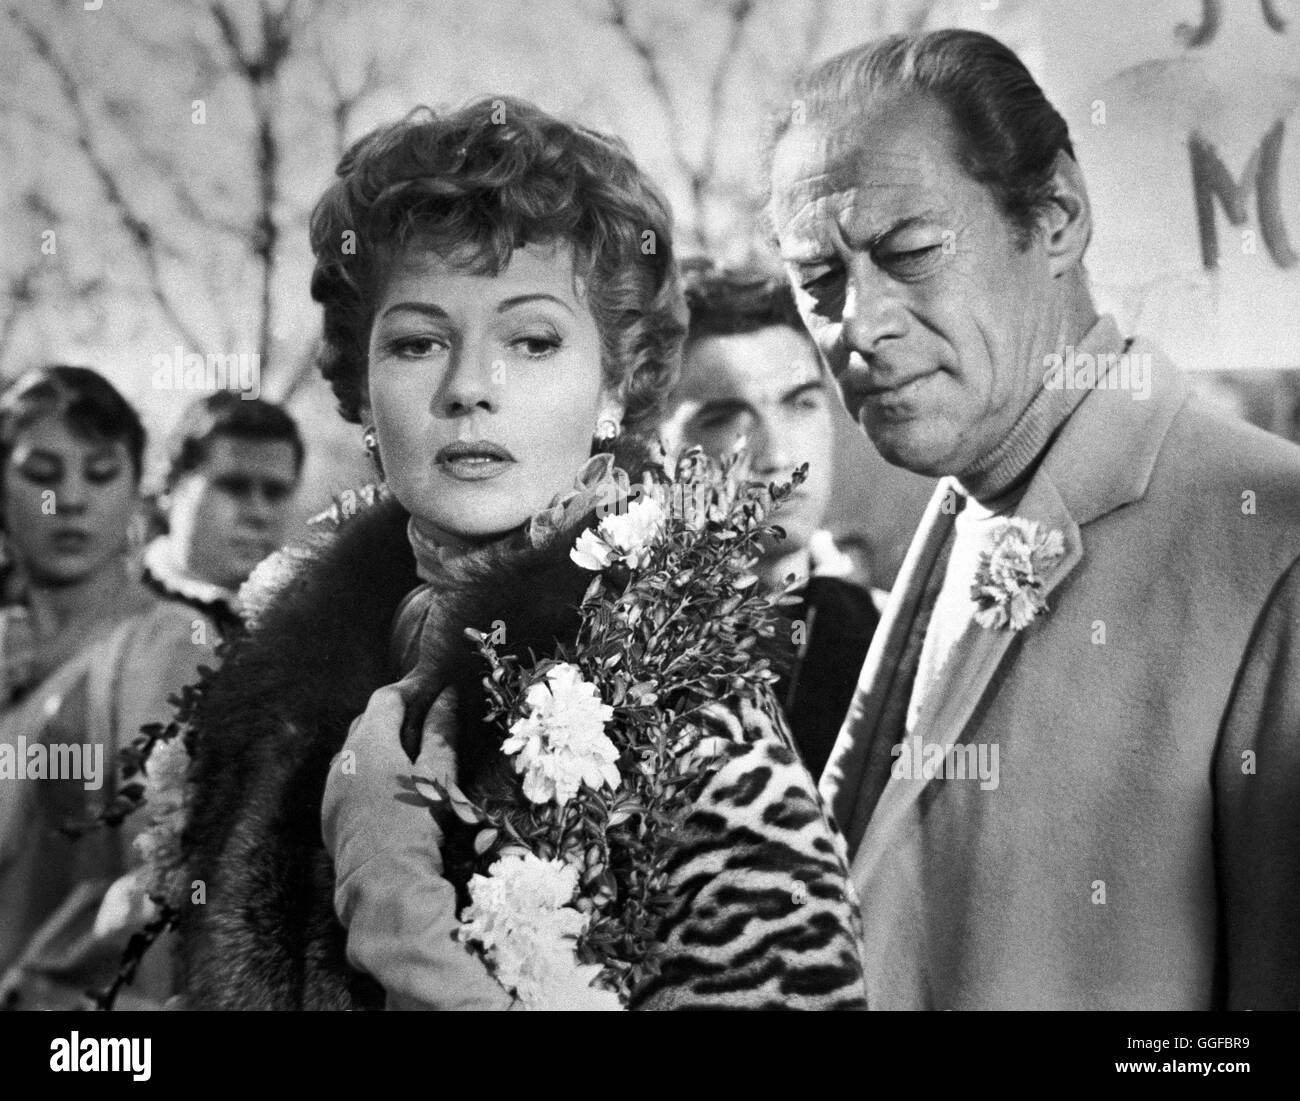 RENDEZVOUS IN MADRID / The happy thieves USA 1961 / George Marshall RITA HAYWORTH als Eve, REX HARRISON als Jim Bourne, in 'Rendezvous in Madrid', 1961. Regie: George Marshall aka. The happy thieves Stock Photo